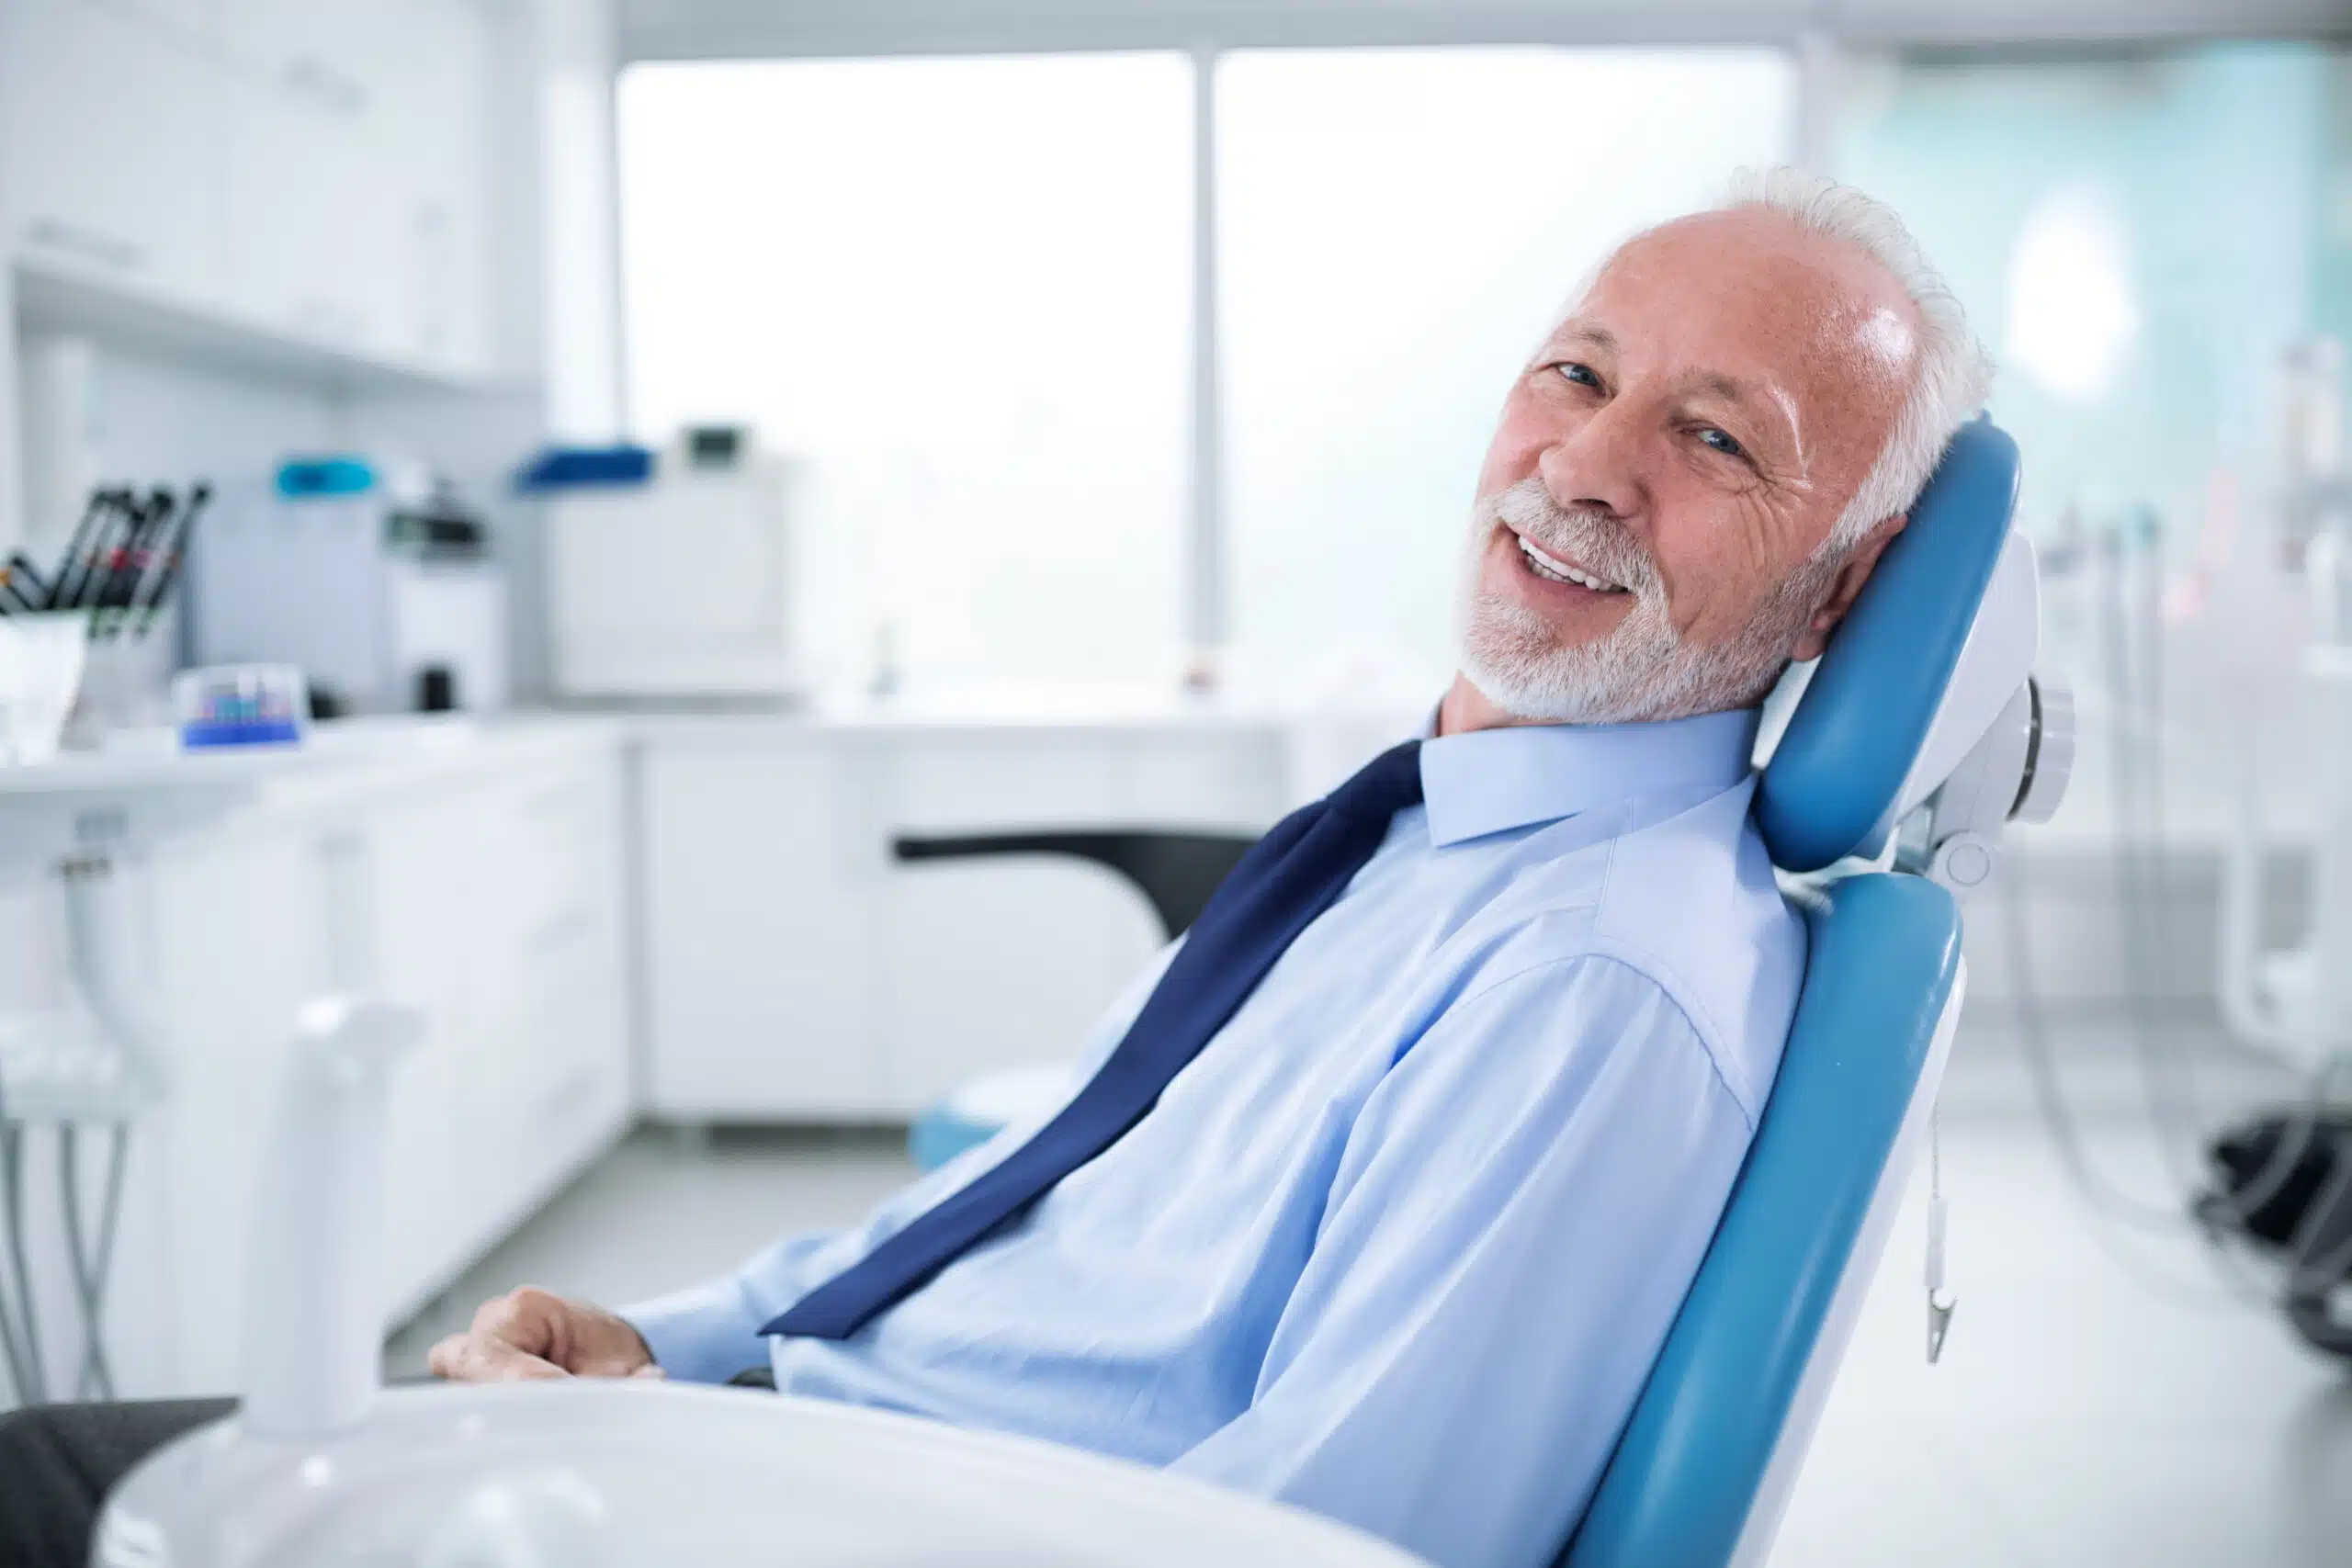 Protect your gums and overall health with our specialized treatments for periodontal disease.